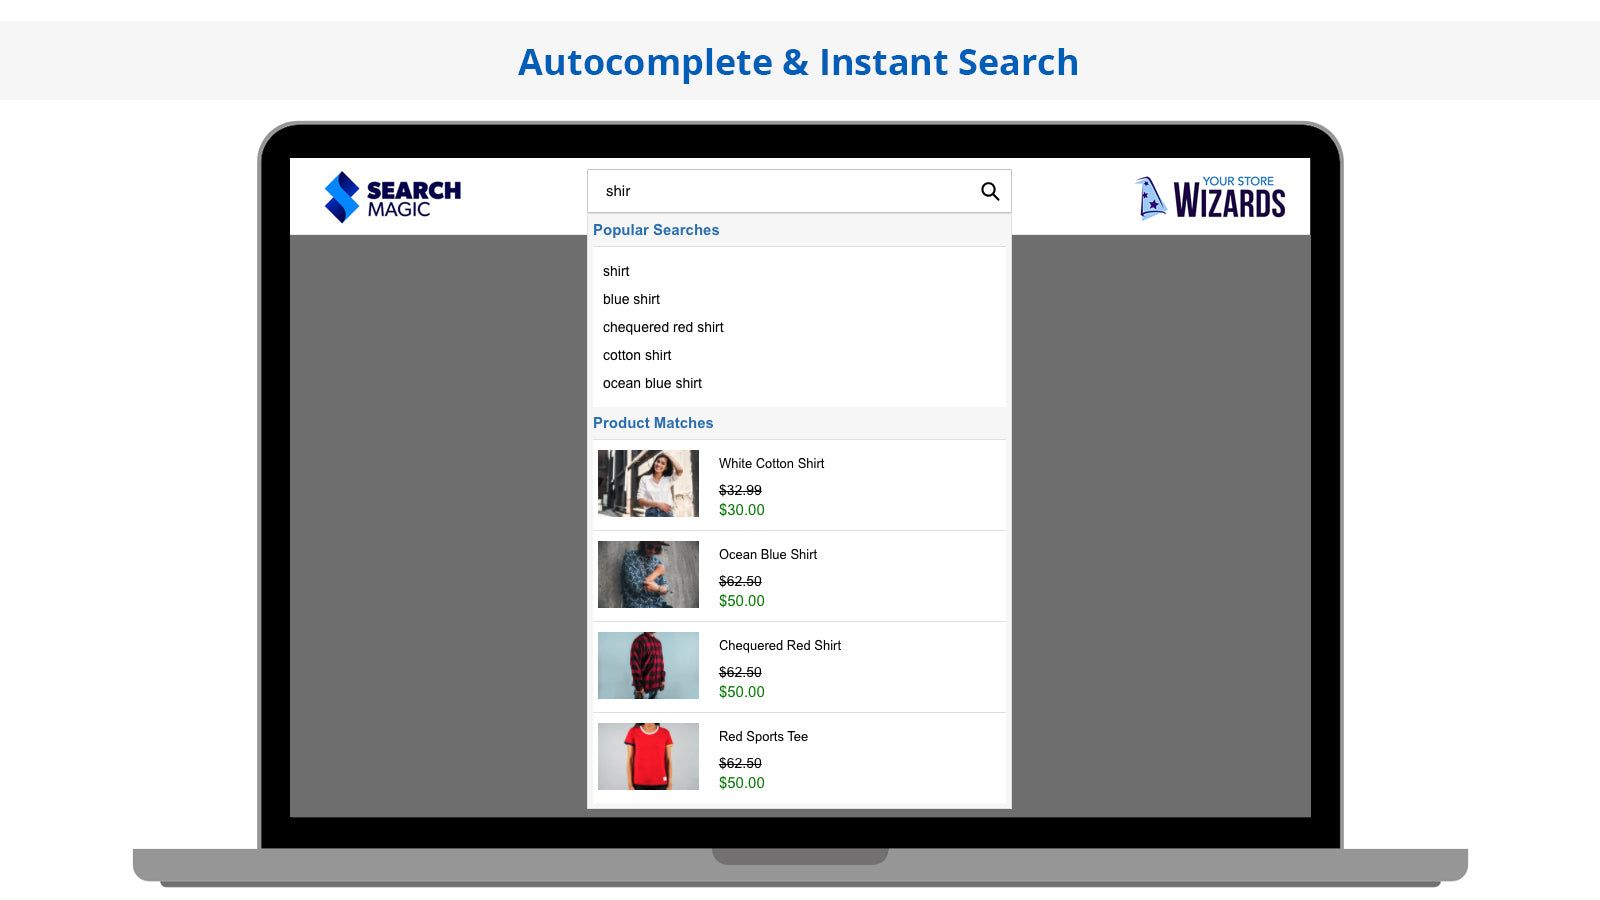 Search Magic Autocomplete and Instant Search